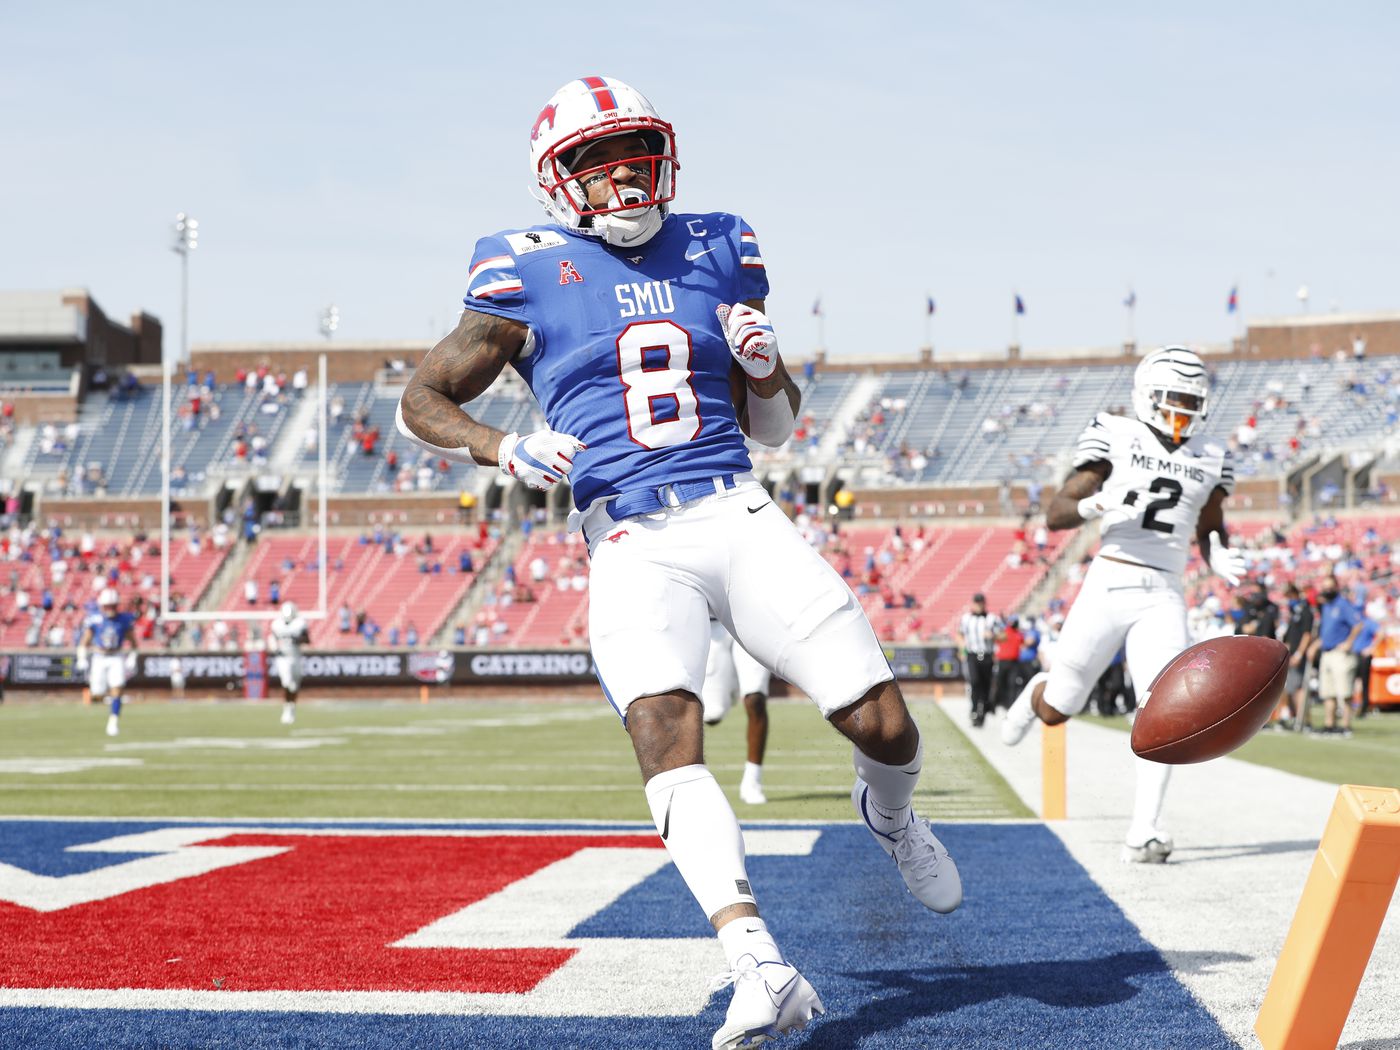 Smu Hail Mary Video Watch Mustangs Beat Louisiana Tech On Last-second Heave - Draftkings Nation